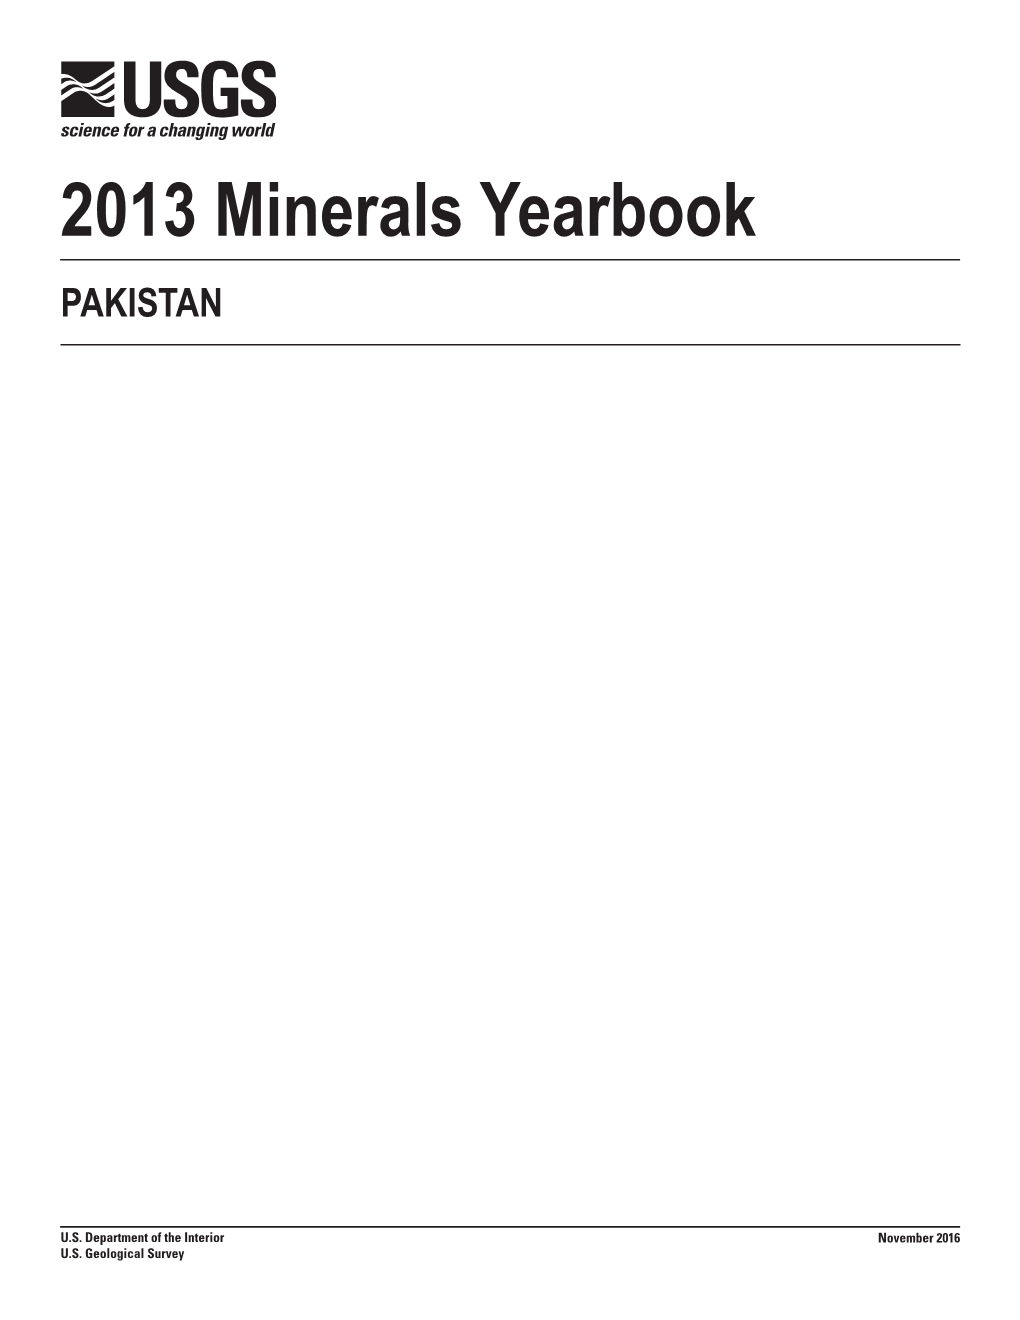 The Mineral Industry of Pakistan in 2013